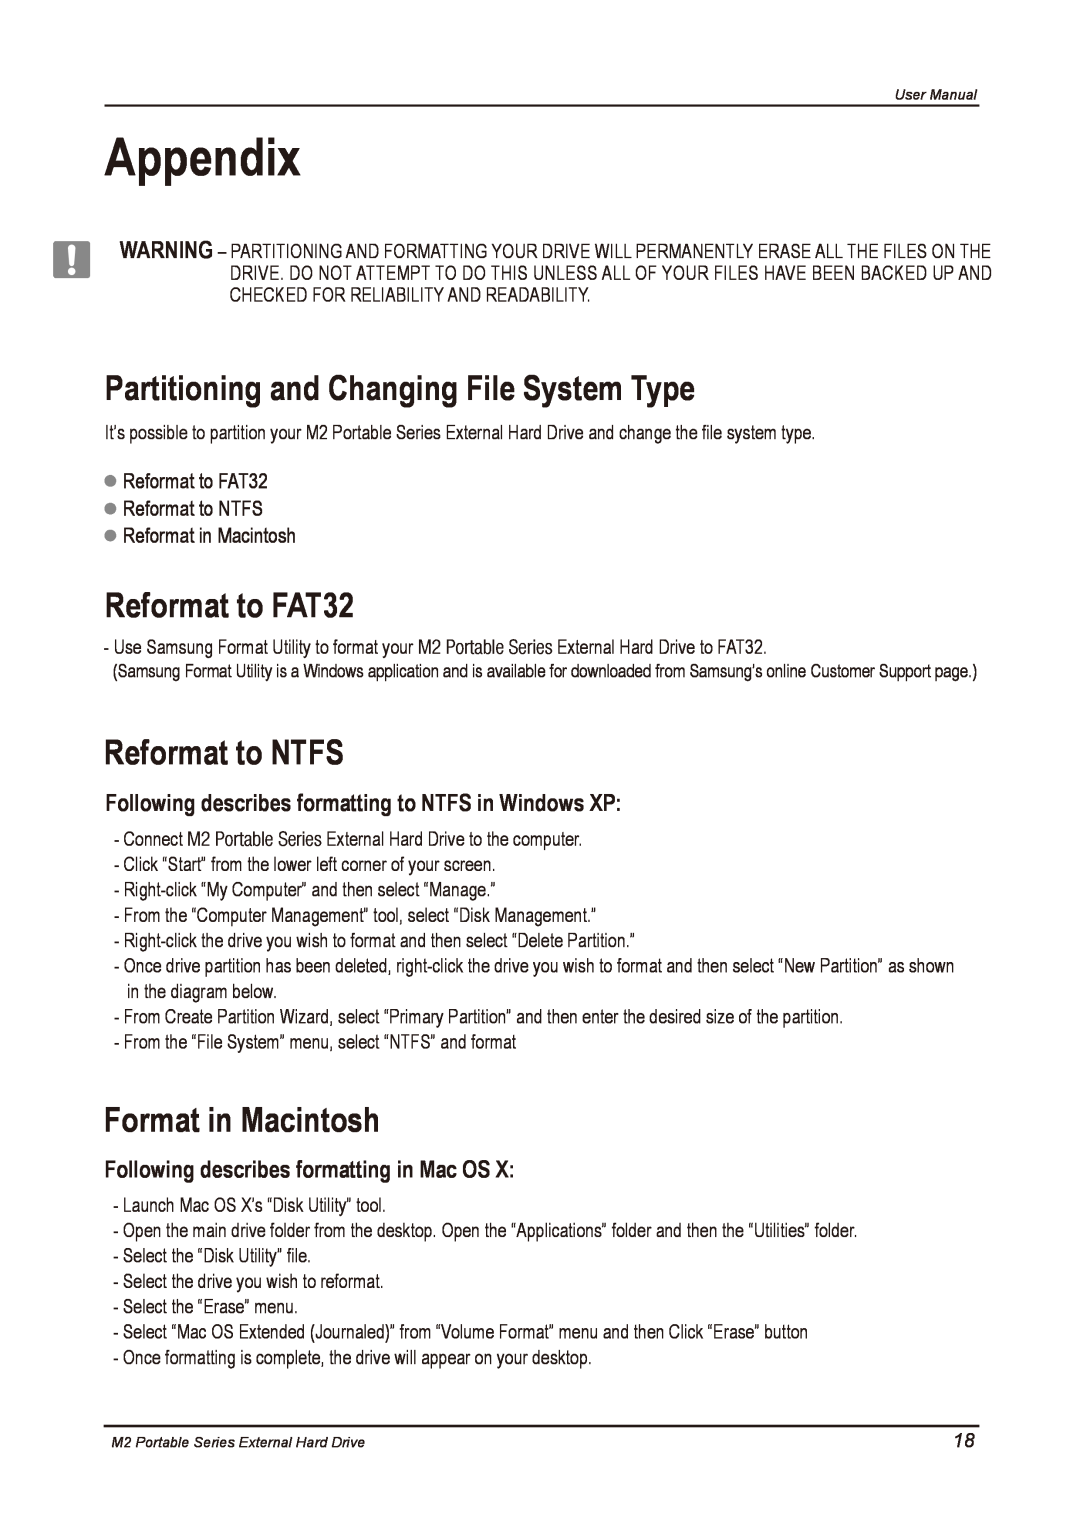 Samsung HX-M750UAB, HX-M500UAY Appendix, Partitioning and Changing File System Type, Reformat to FAT32, Reformat to NTFS 